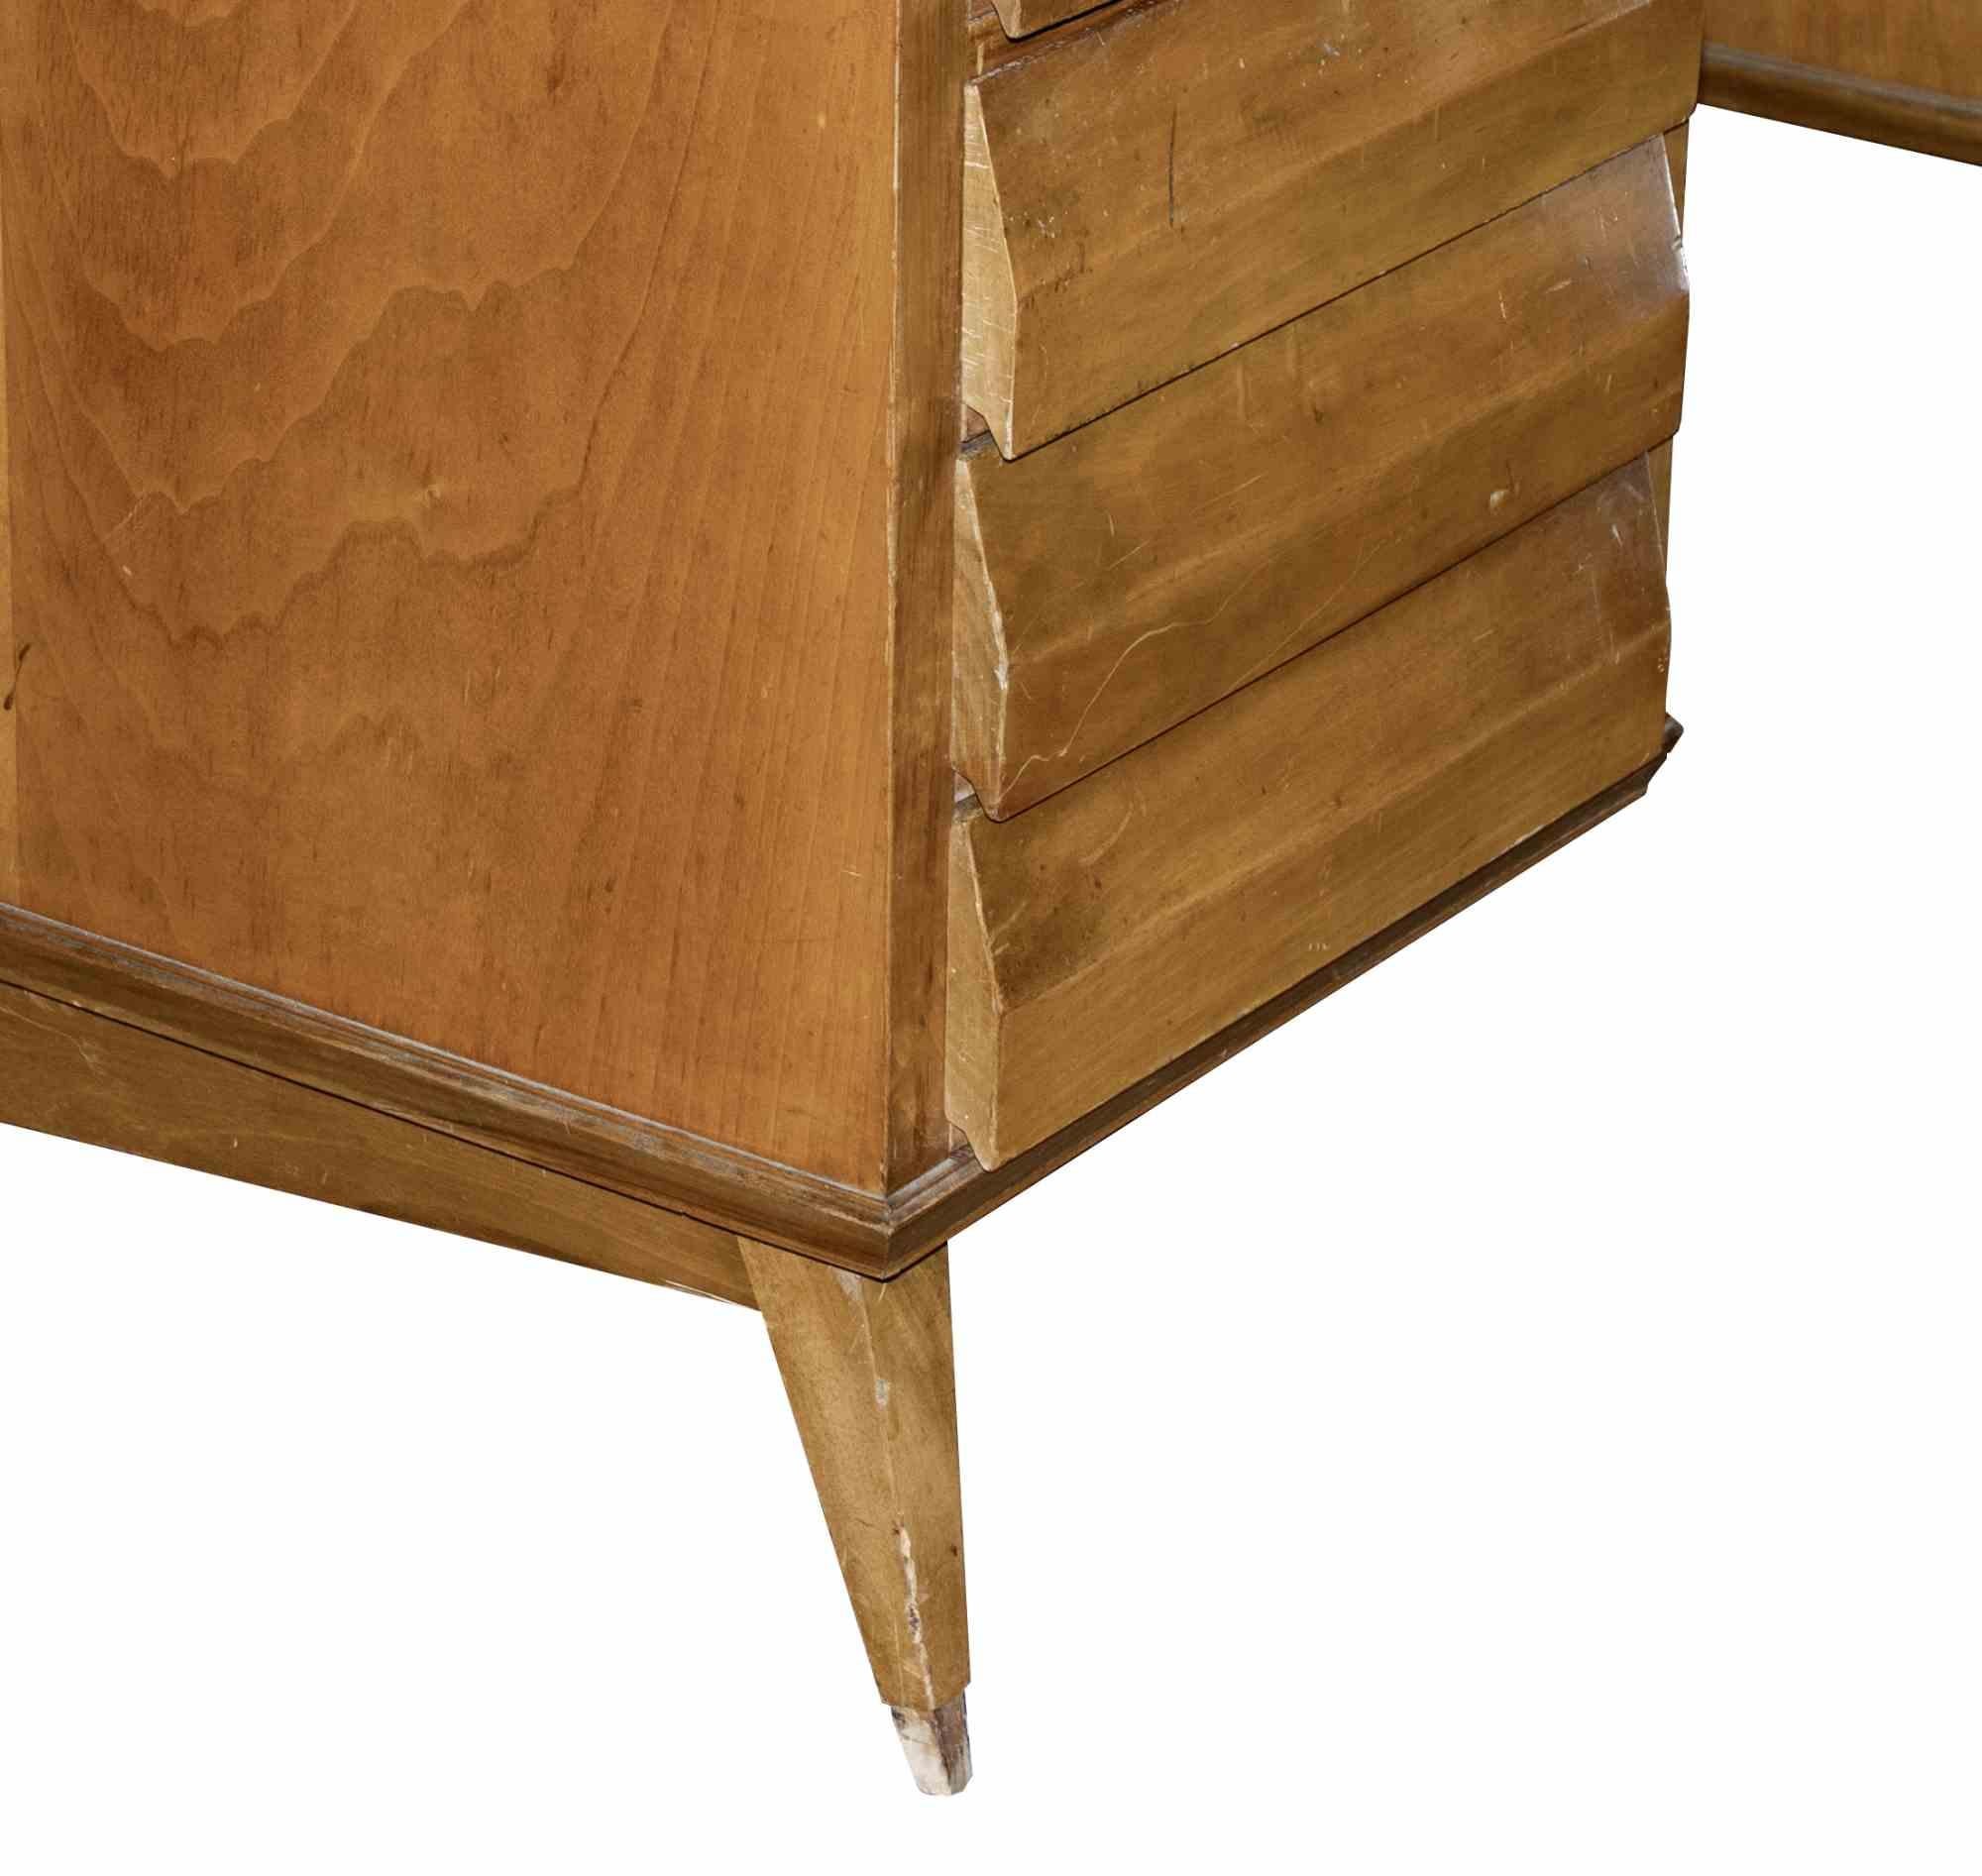 Mid-century wood desk is an original design furniure item realized in the mid-20th century and attributed to Melchiorre Bega.

Extraordinary monumental wooden desk with side drawers.

Mint conditions (scratched wood and lack of little